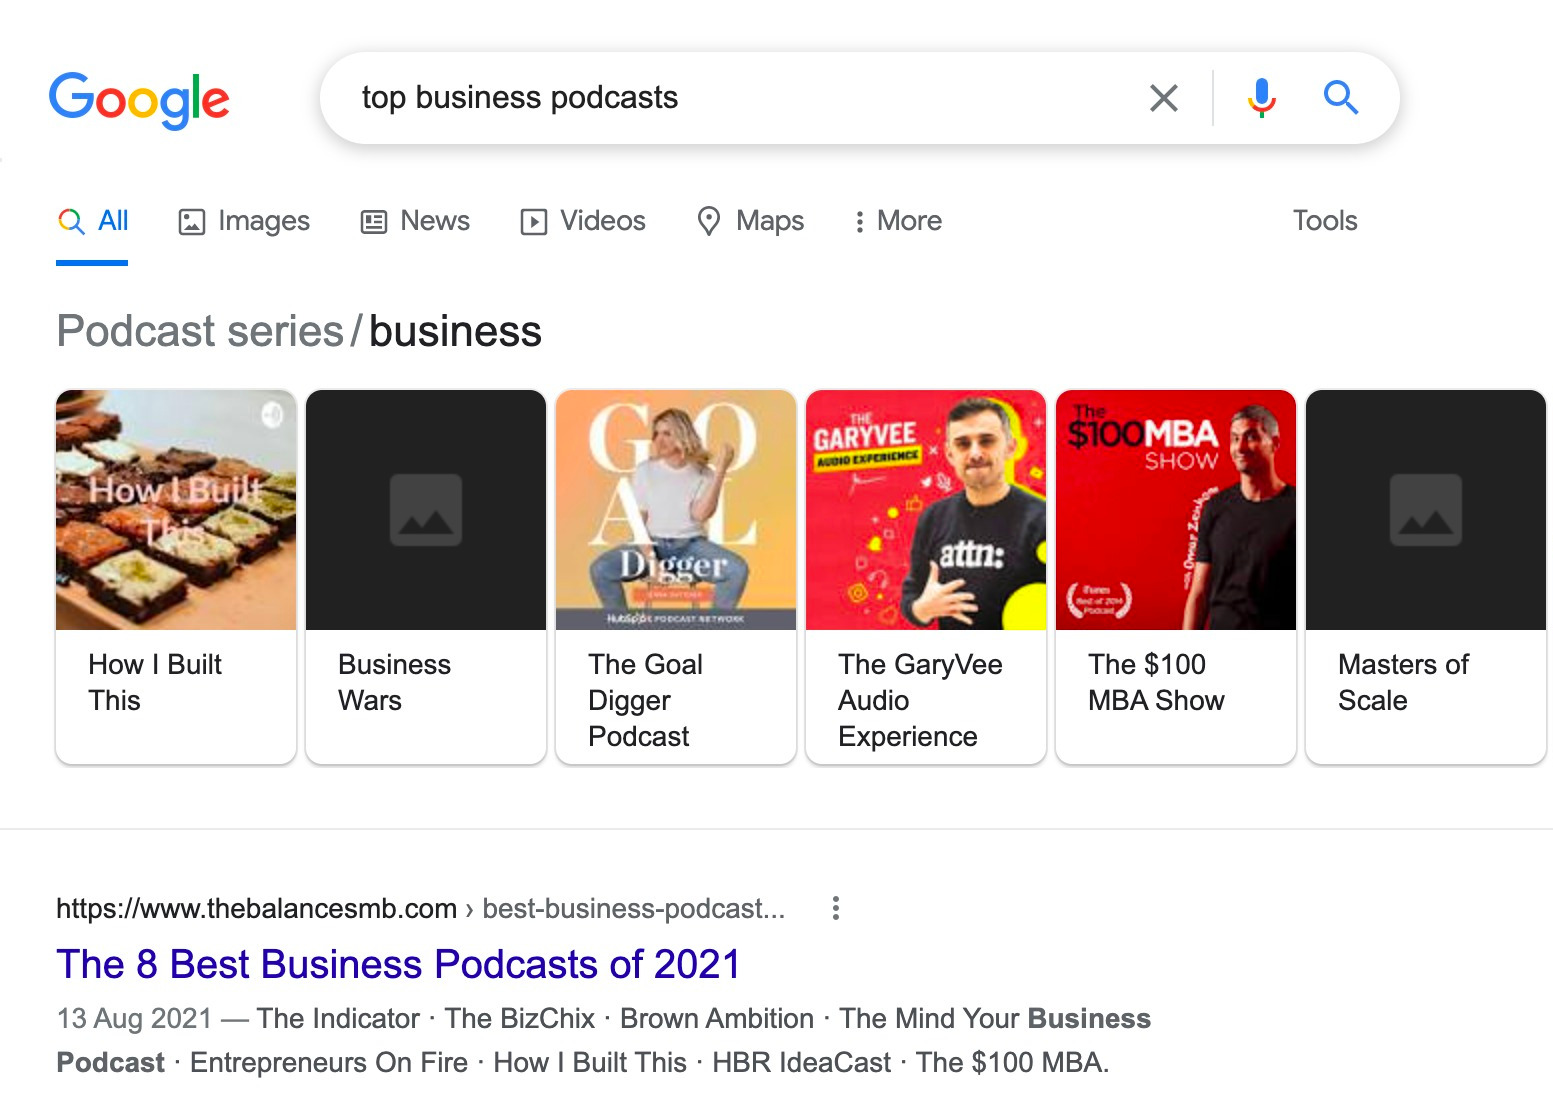 Google results showing the best business podcasts